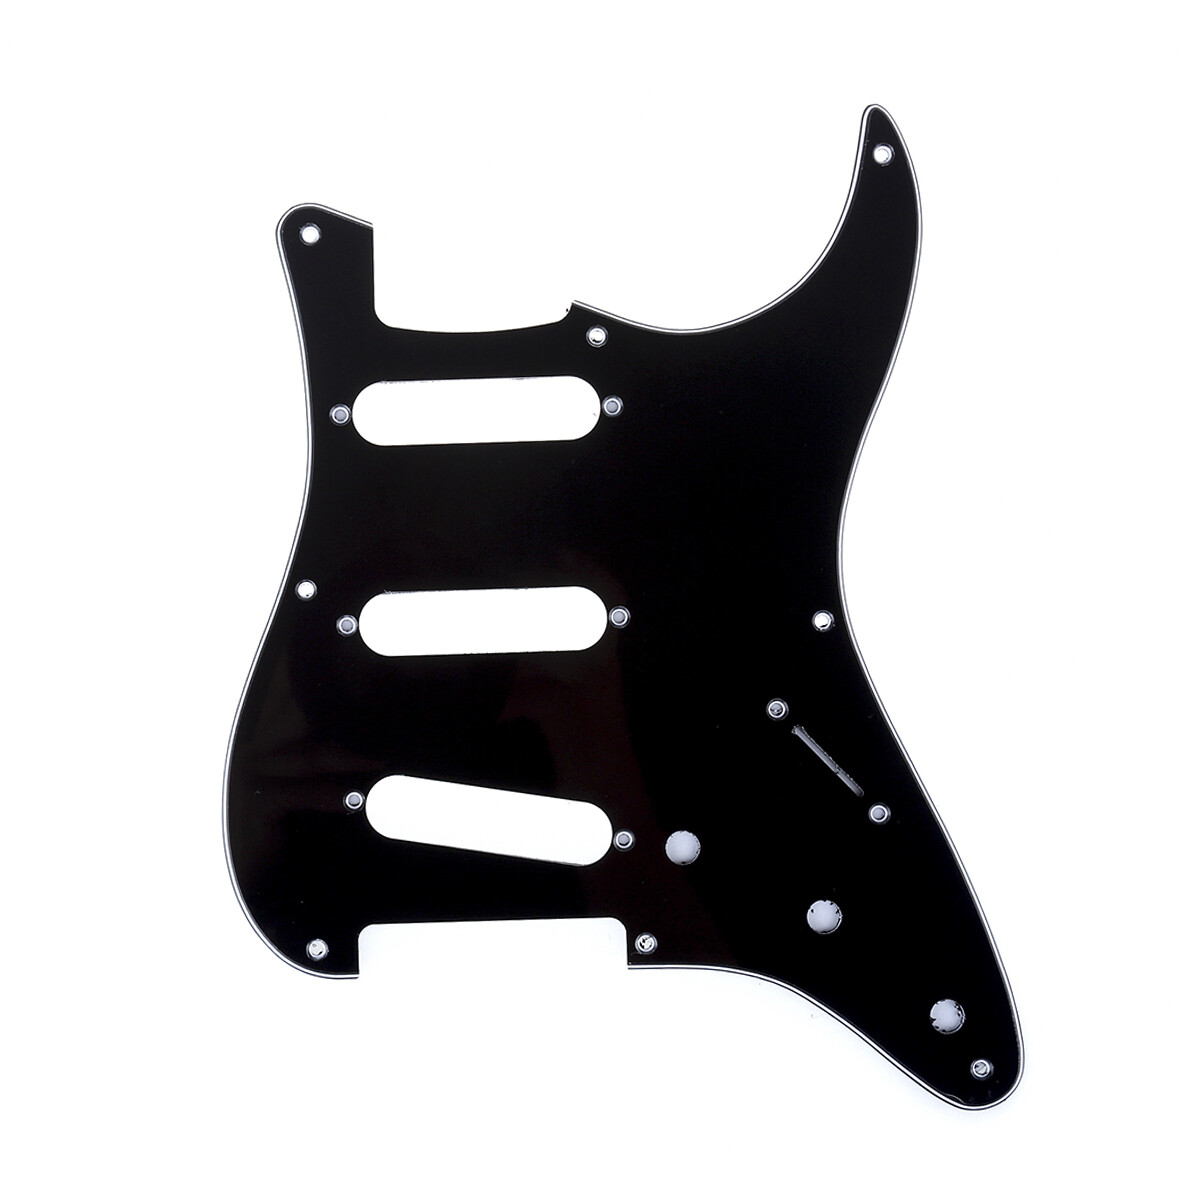 Brio 8-Hole 57 Vintage Style Strat SSS Pickguard for American Stratocaster, 3 Ply Black